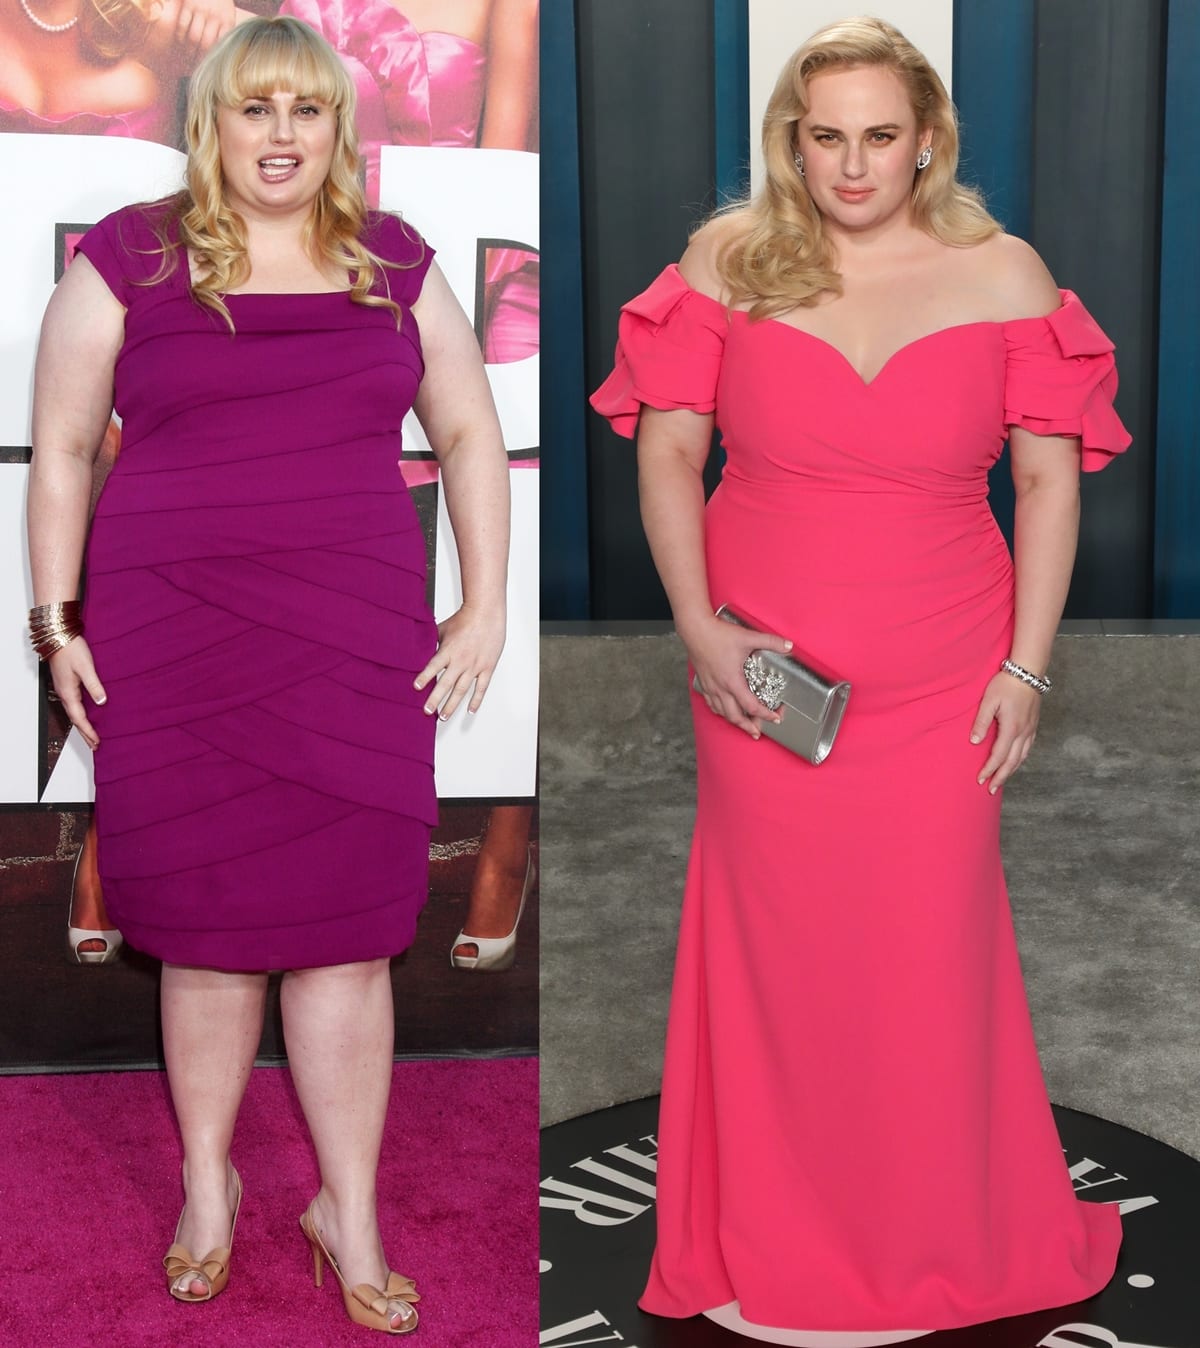 Rebel Wilson at the premiere of Bridesmaids in 2011 (L) and in a pink Badgley Mischka off-the-shoulder dress at the 2020 Vanity Fair Oscar Party